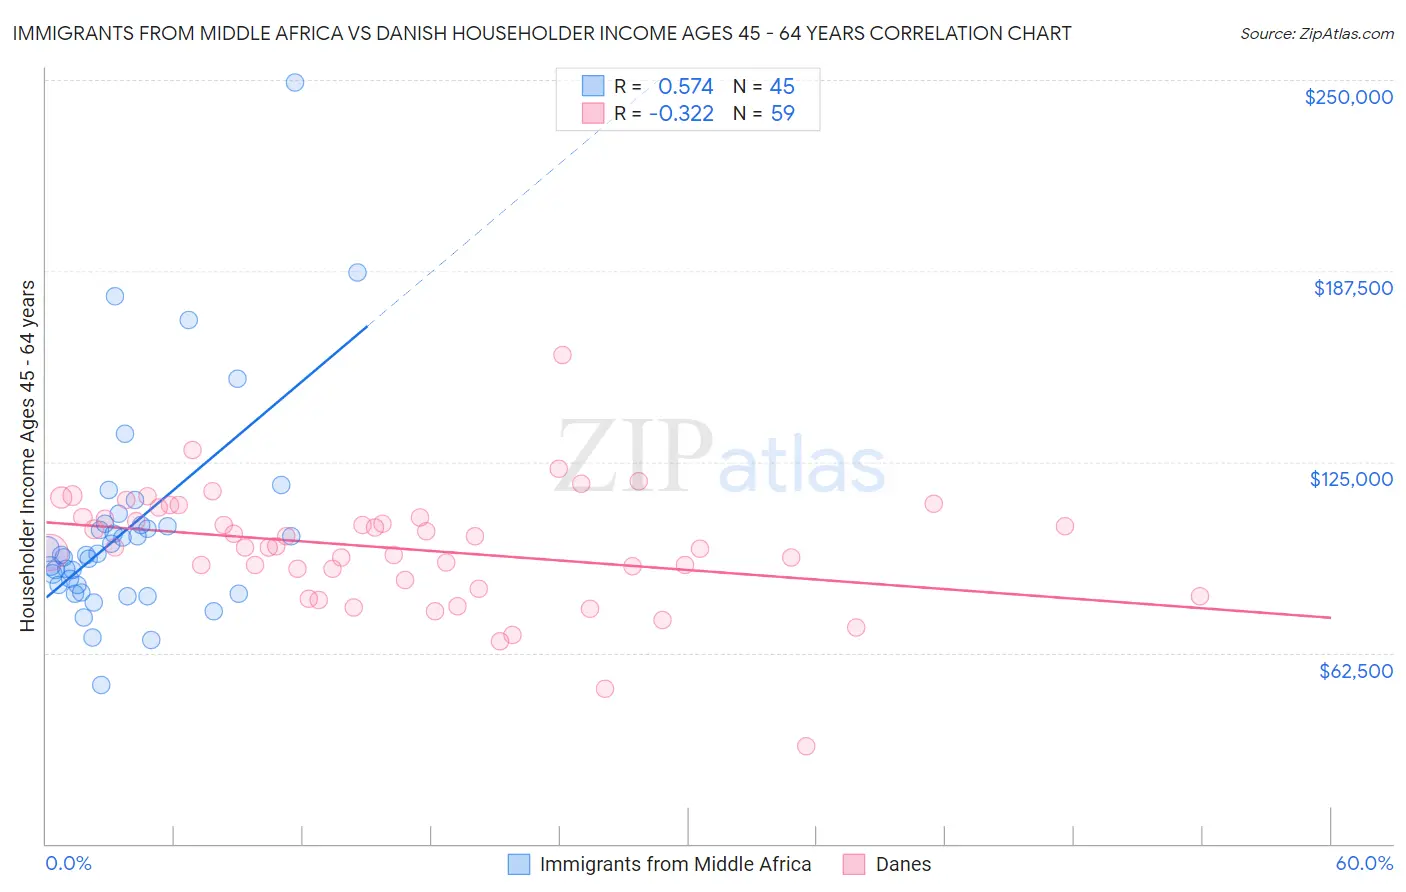 Immigrants from Middle Africa vs Danish Householder Income Ages 45 - 64 years